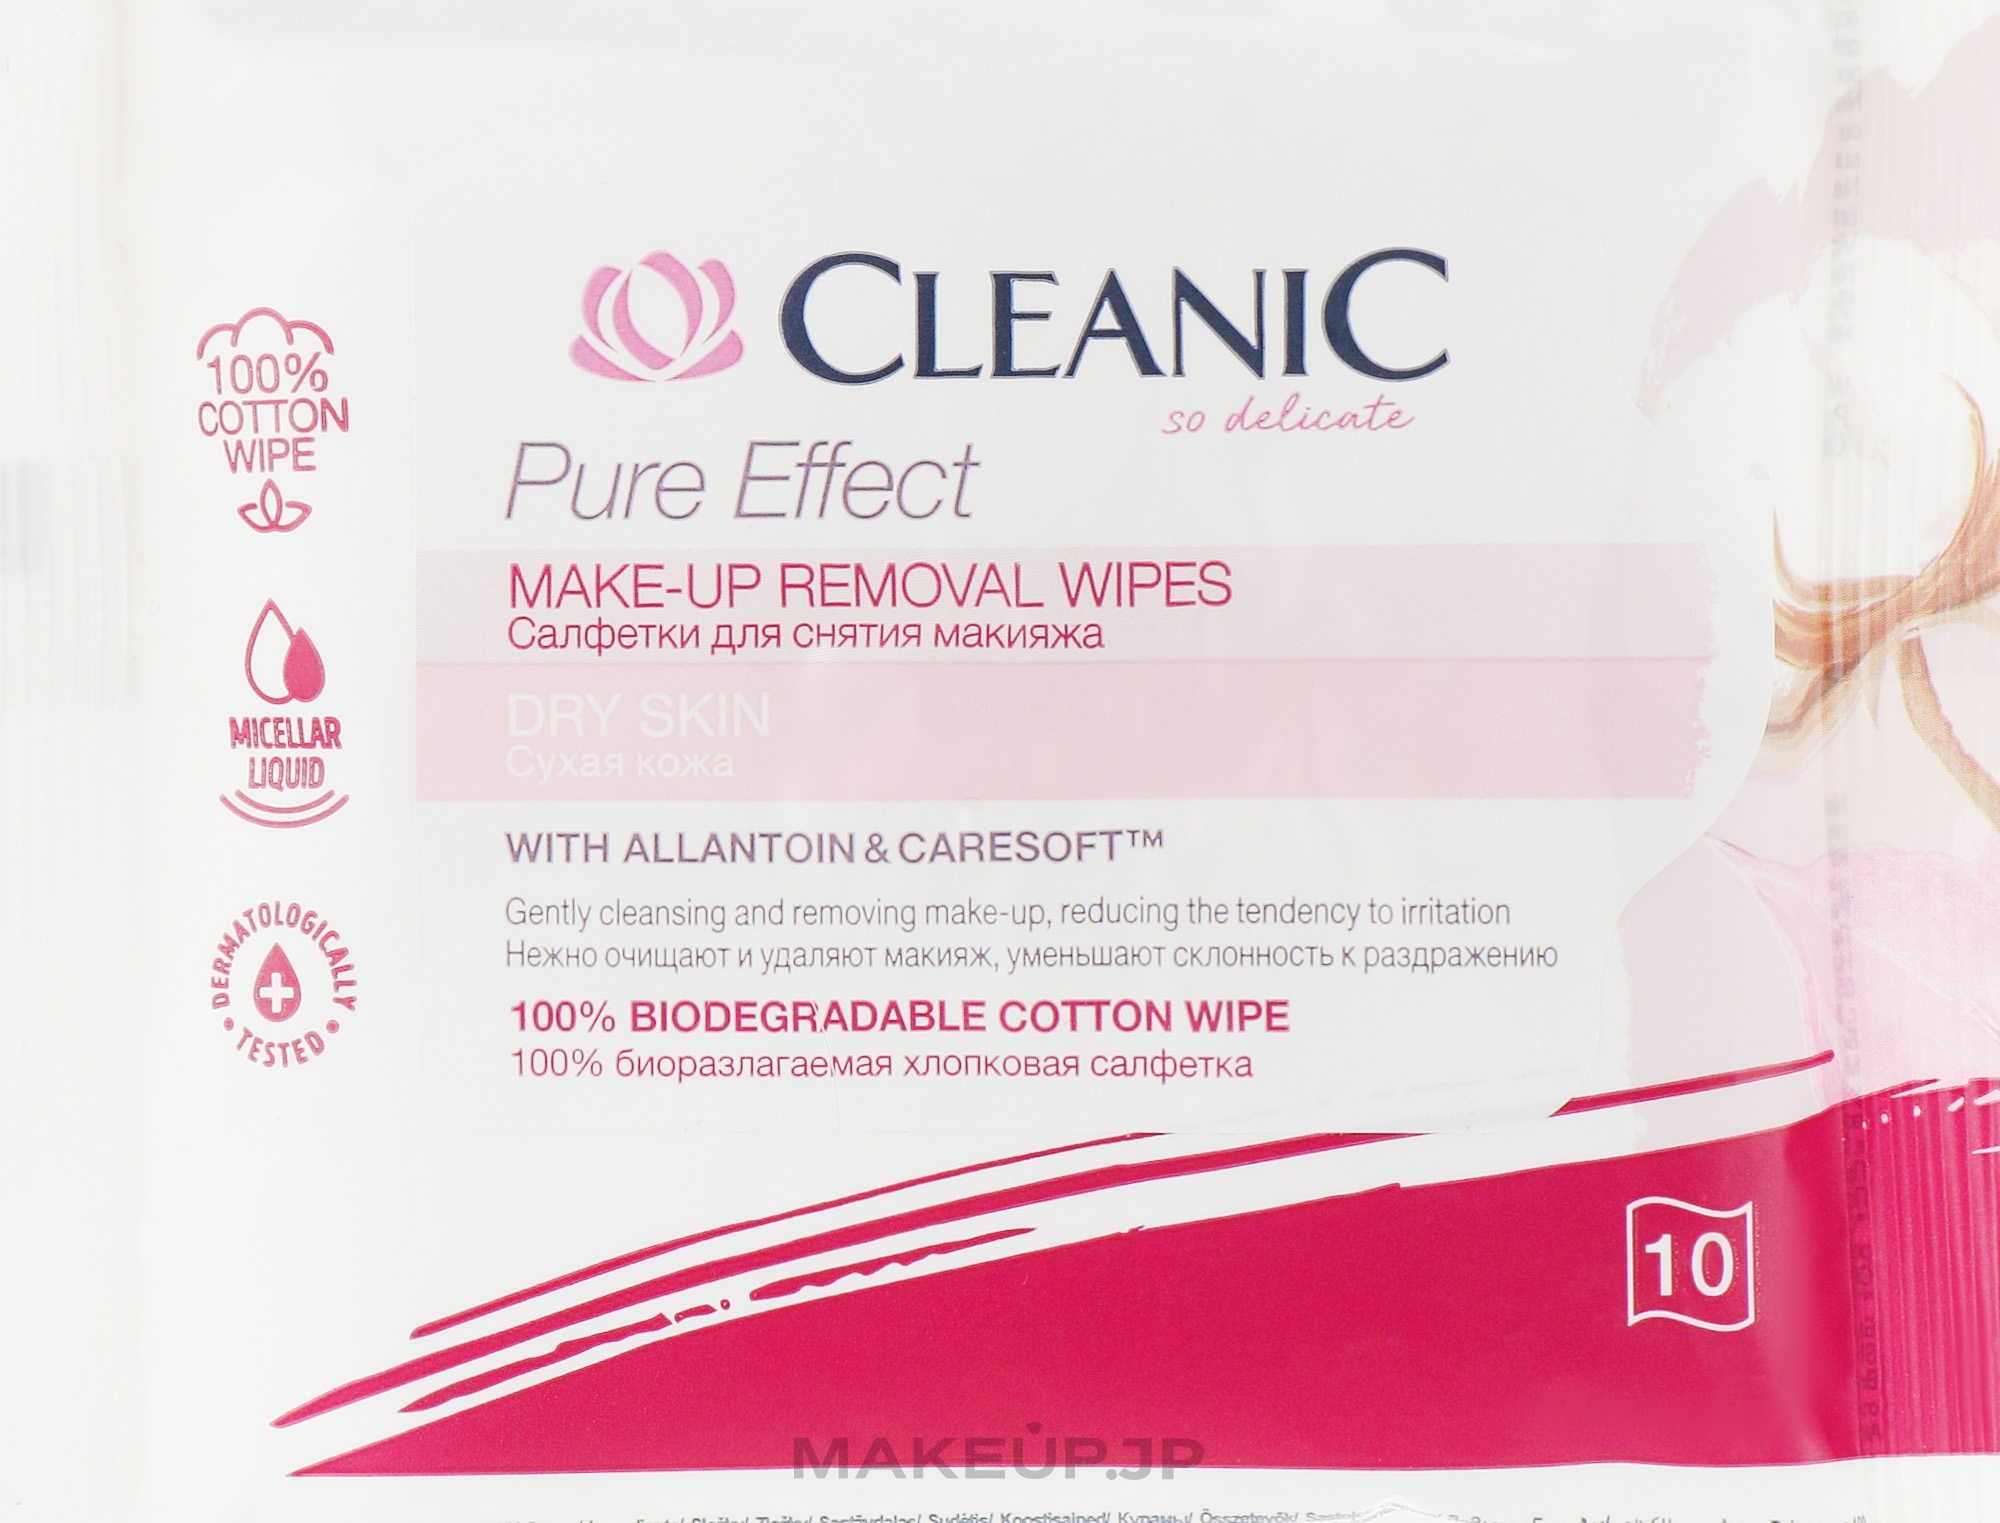 Makeup Remover Wipes for Dry Skin, 10 pcs - Cleanic Pure Effect Soothing — photo 10 szt.